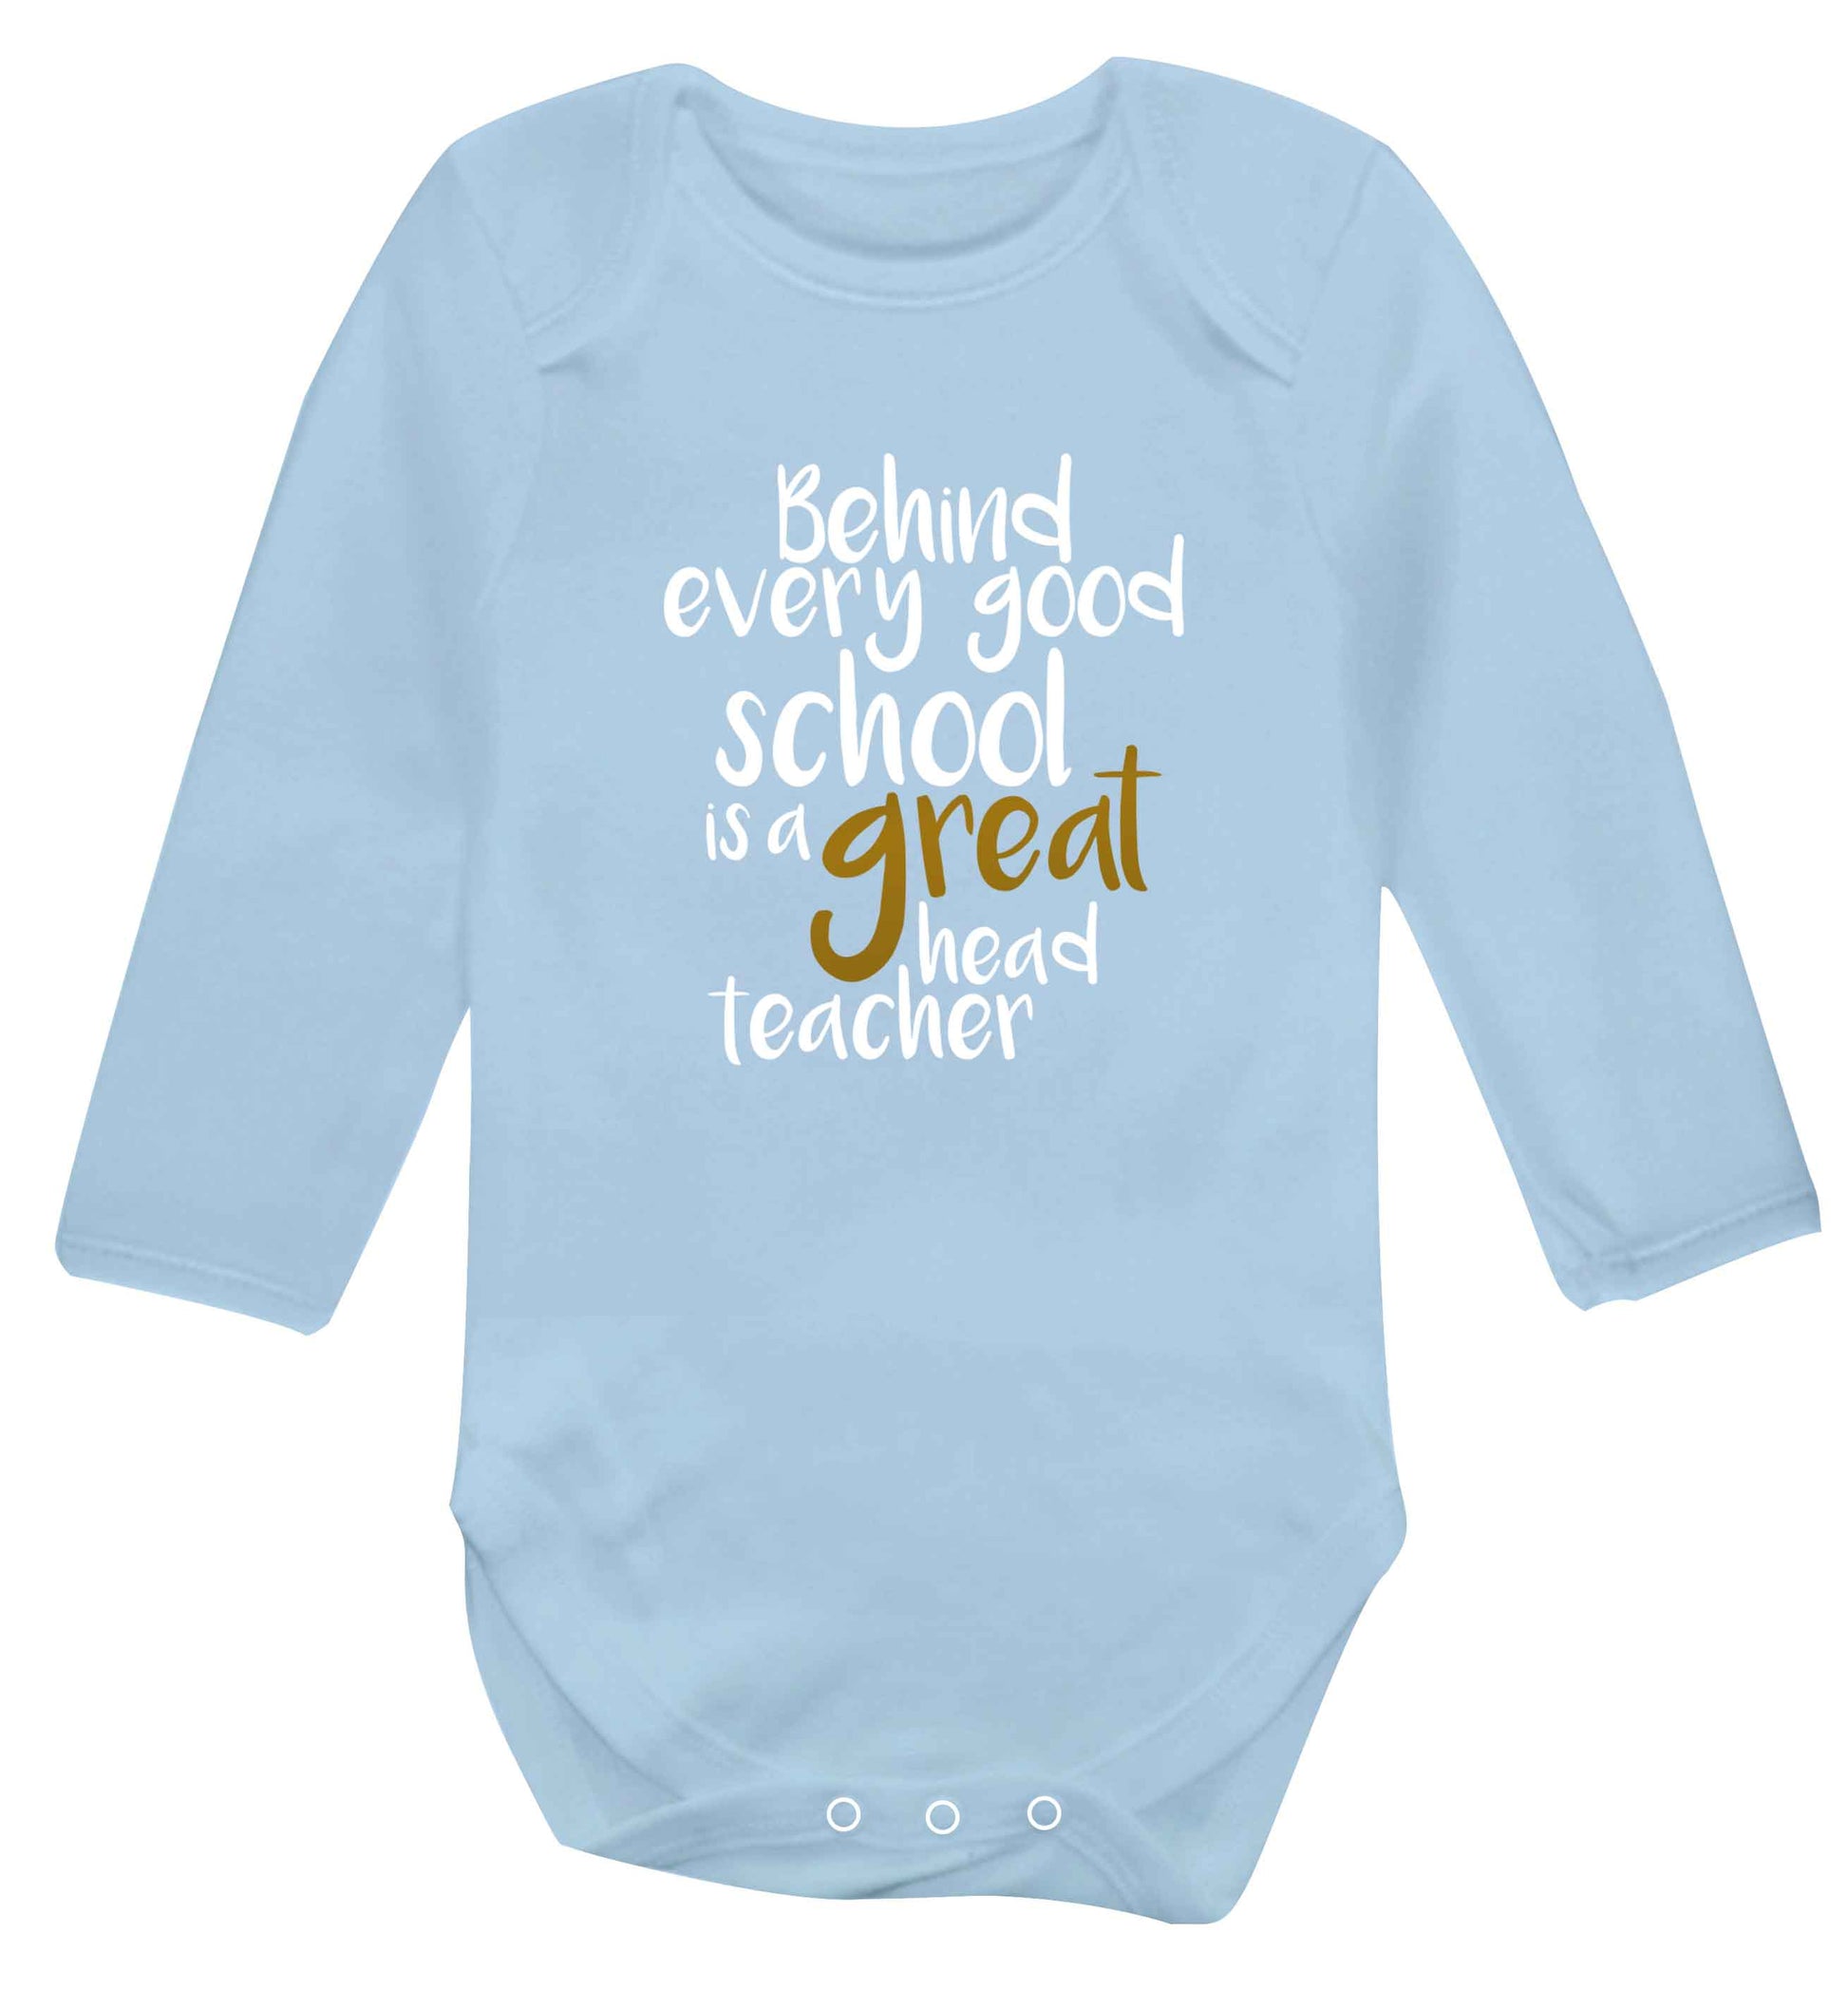 Behind every good school is a great head teacher baby vest long sleeved pale blue 6-12 months